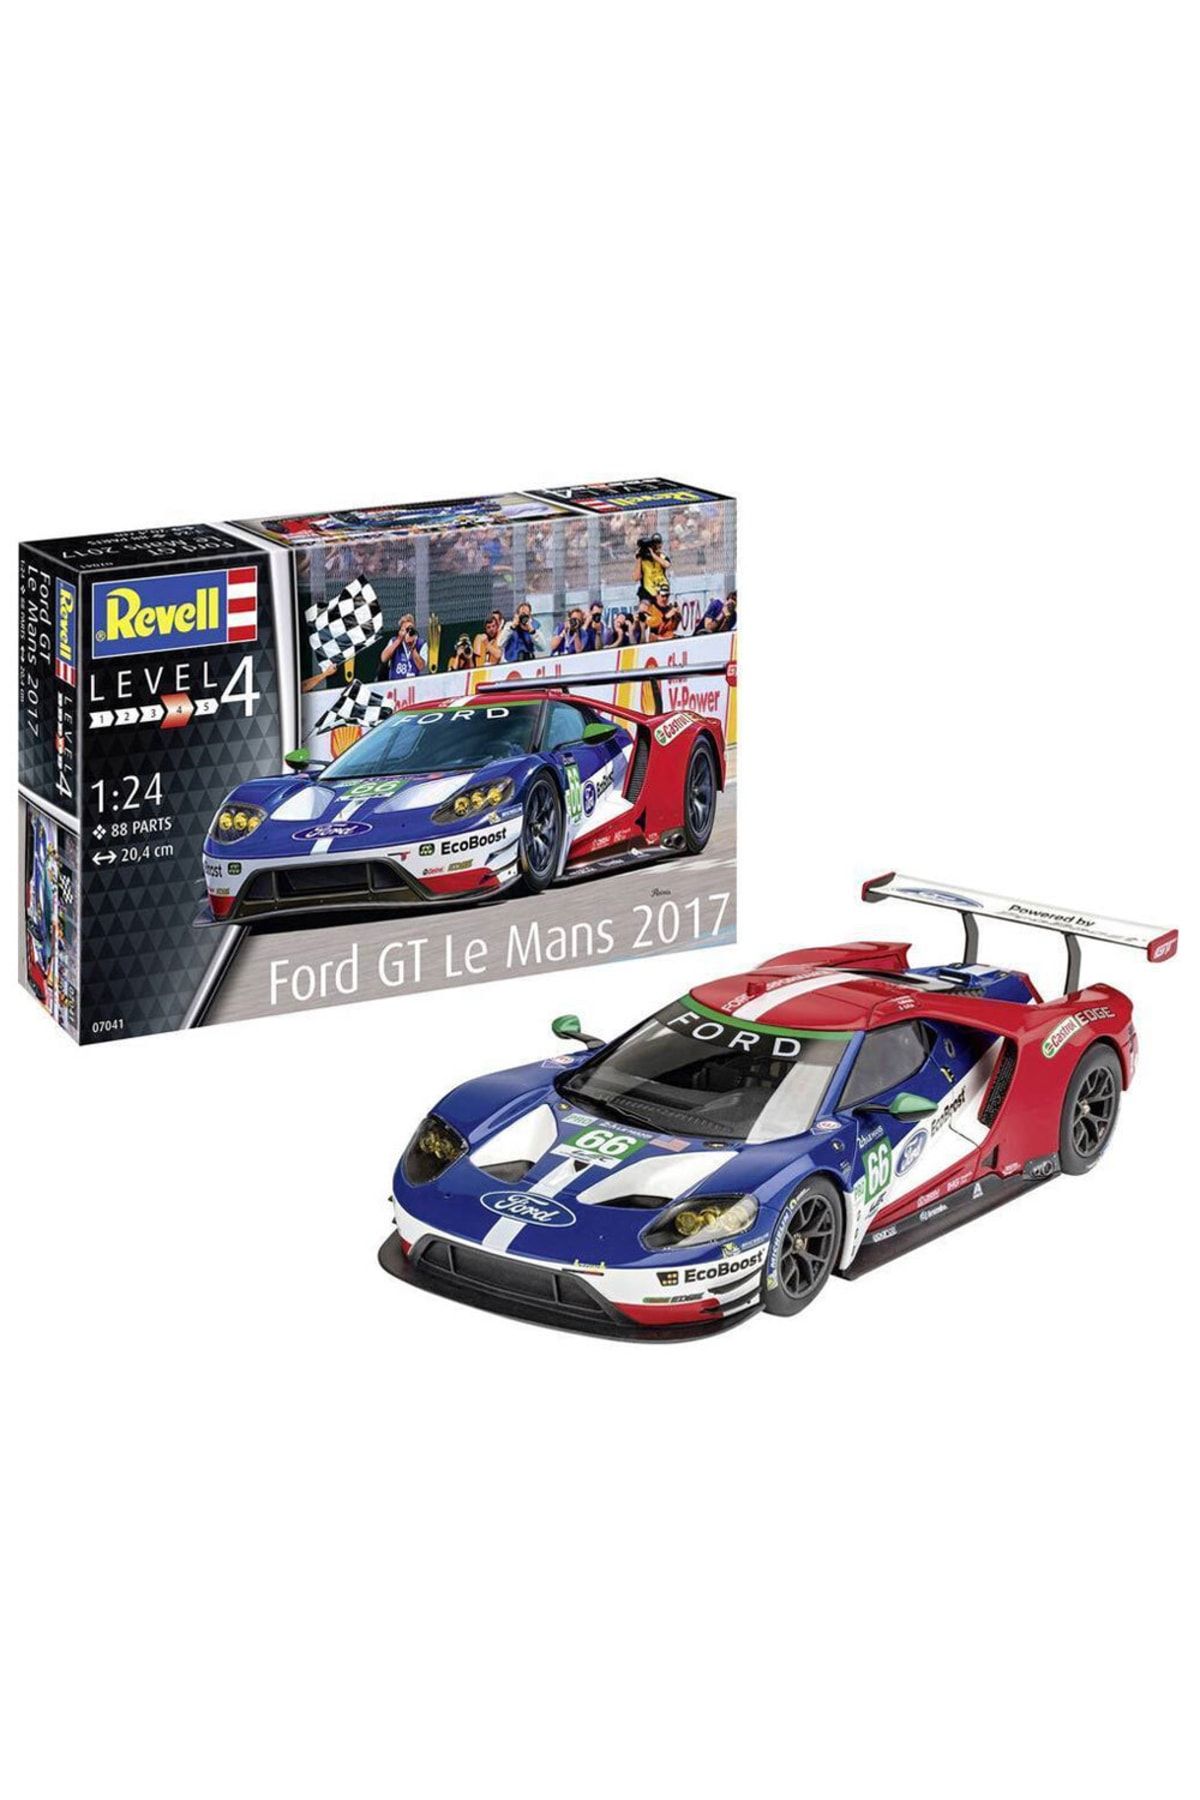 REVELL 1:24 Ford GT Le Mans 2017 Car 67041